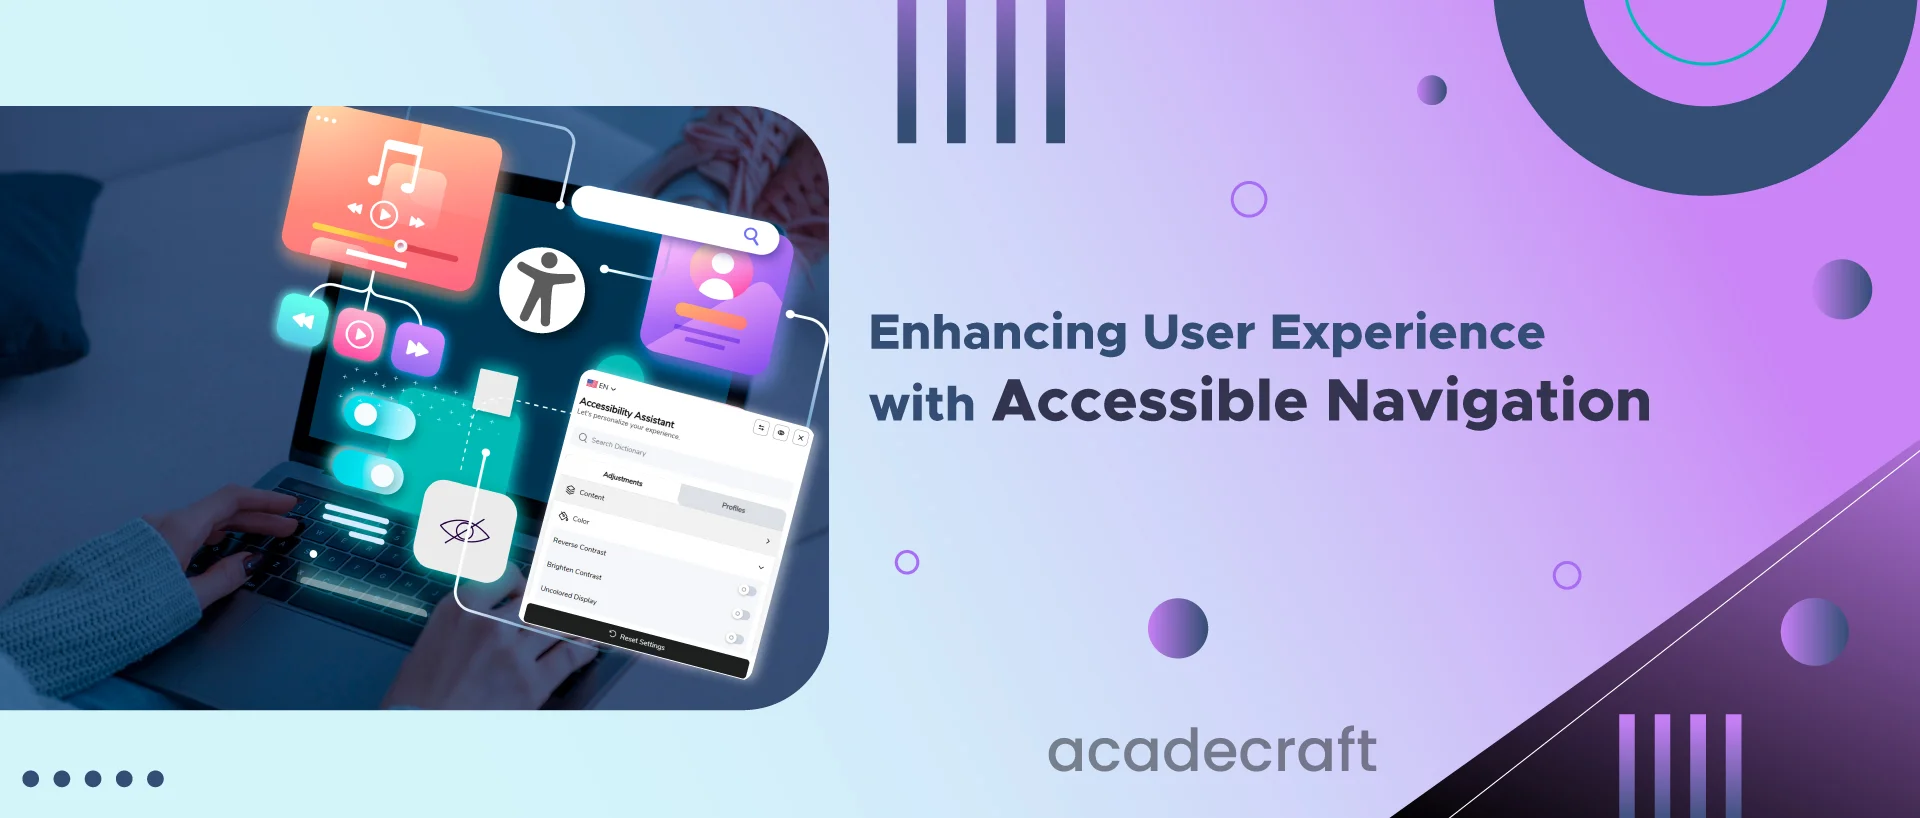 Enhancing User Experience with Accessible Navigation